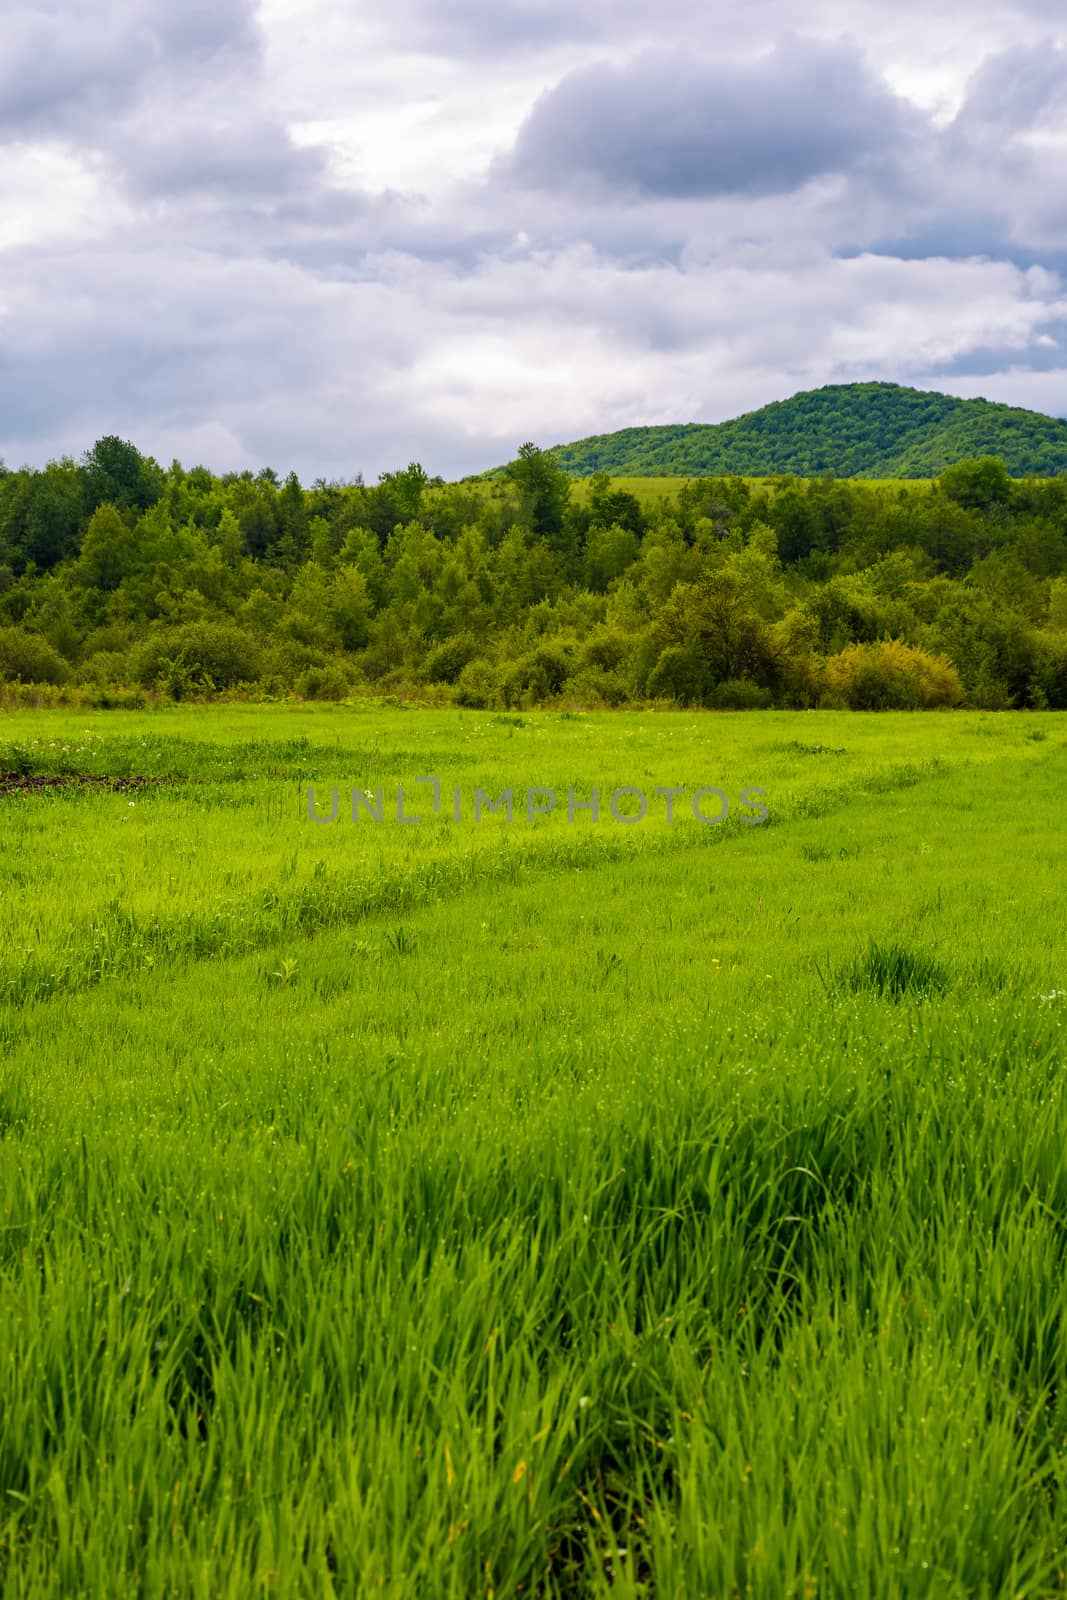 grassy field near the forest in mountains by Pellinni